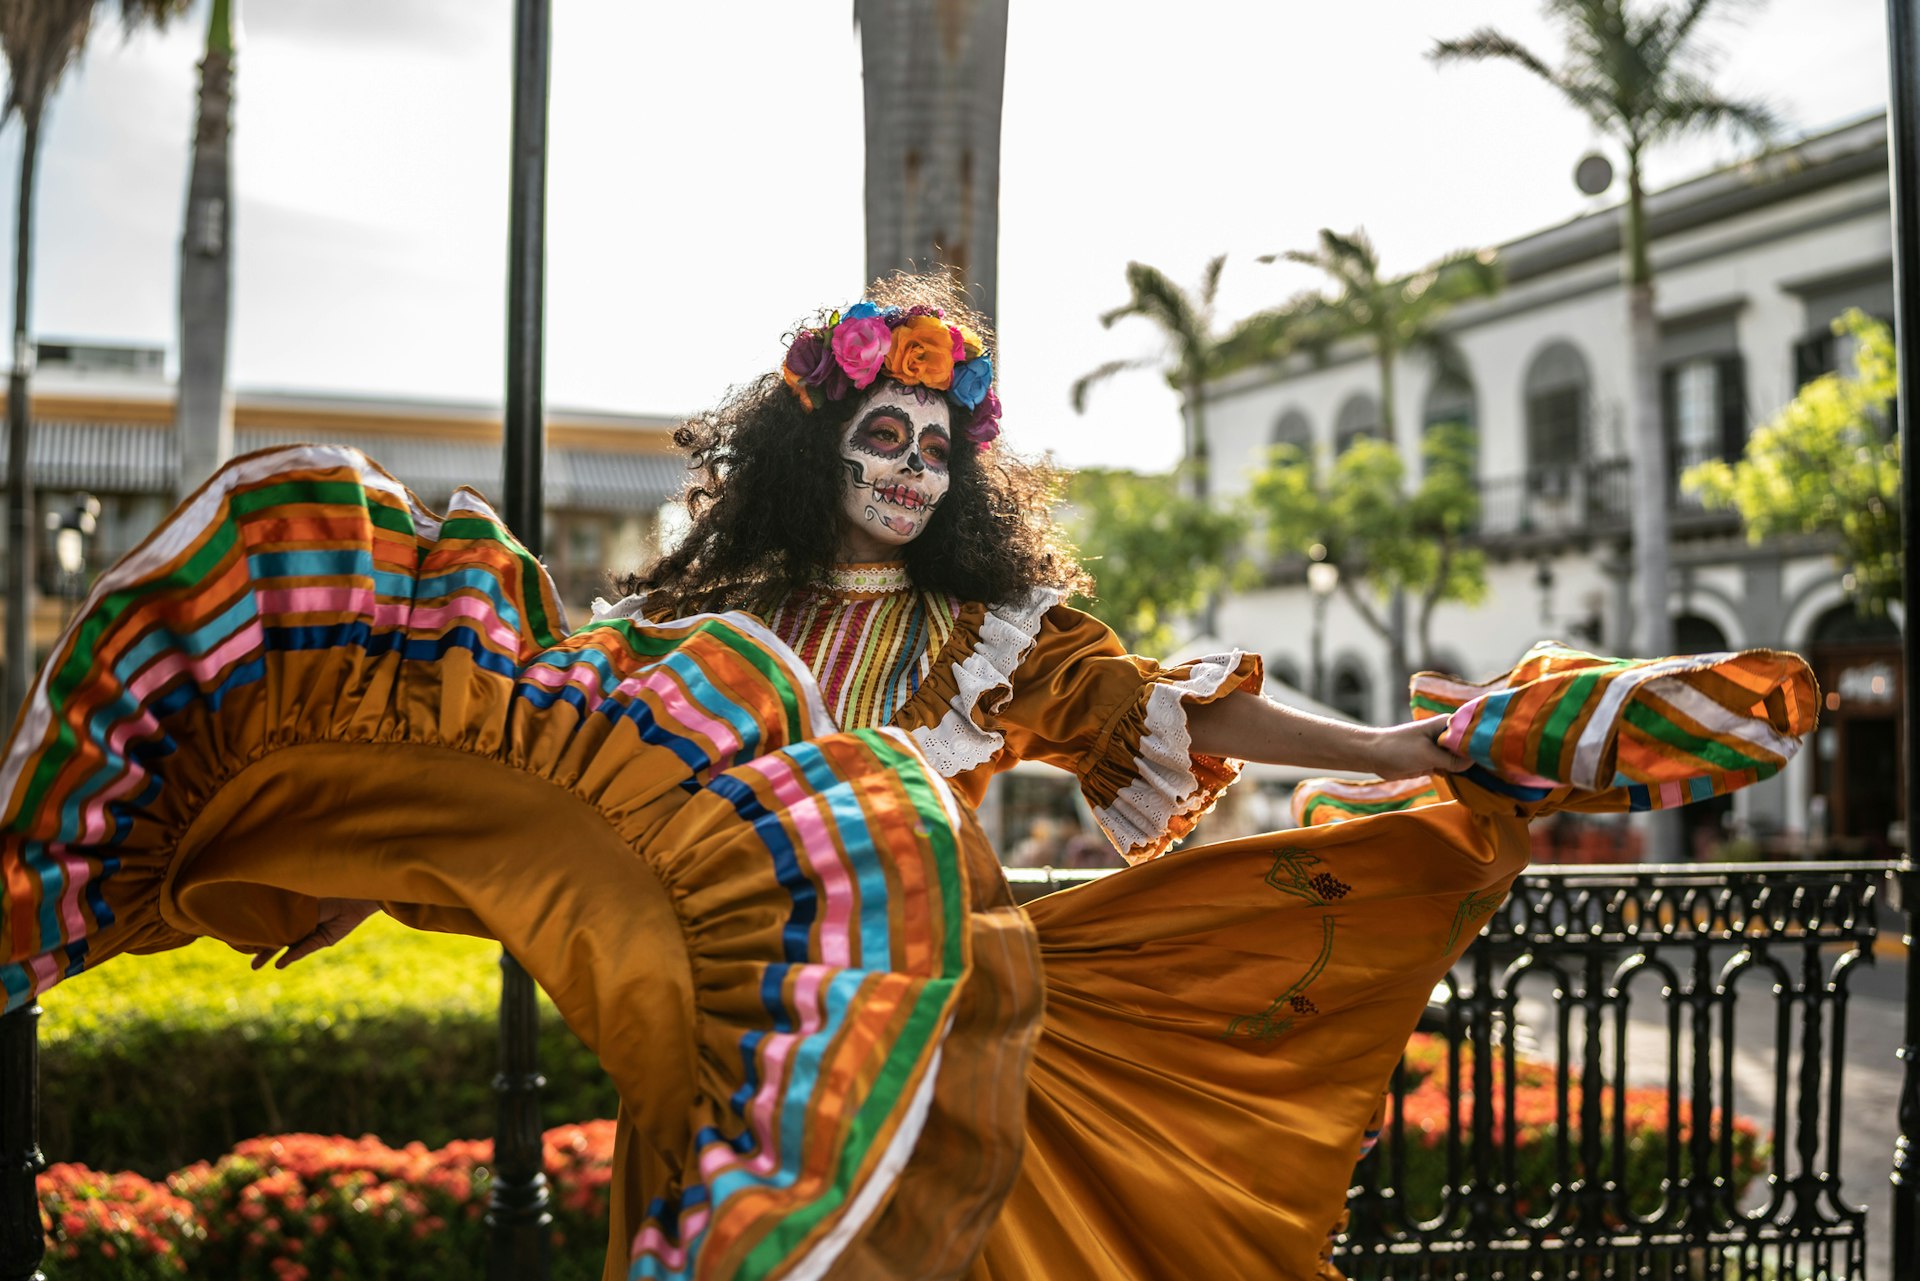 Woman dancing and celebrating Day of the Dead in Mexico in full costume.